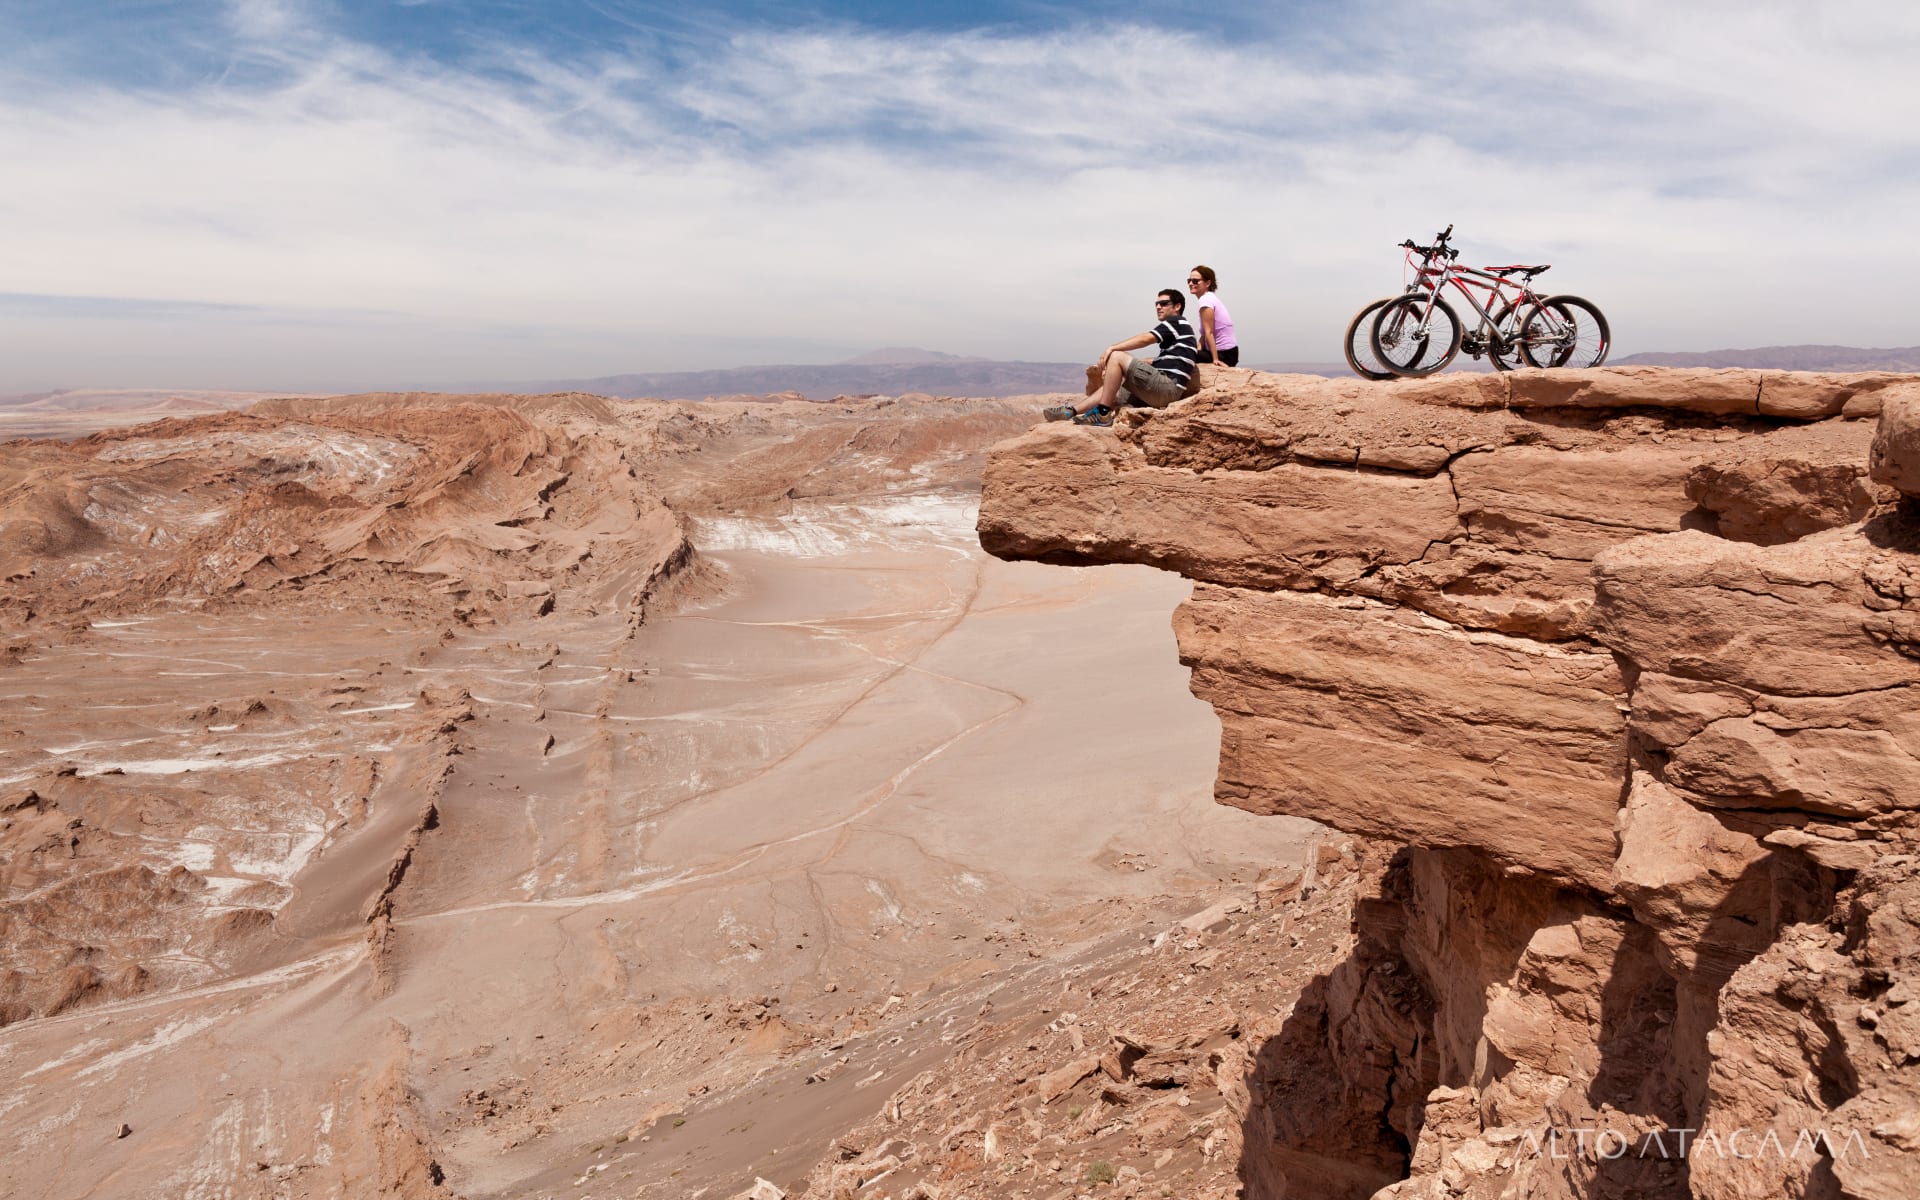 A couple are sitting on a rocky outcrop with bikes.